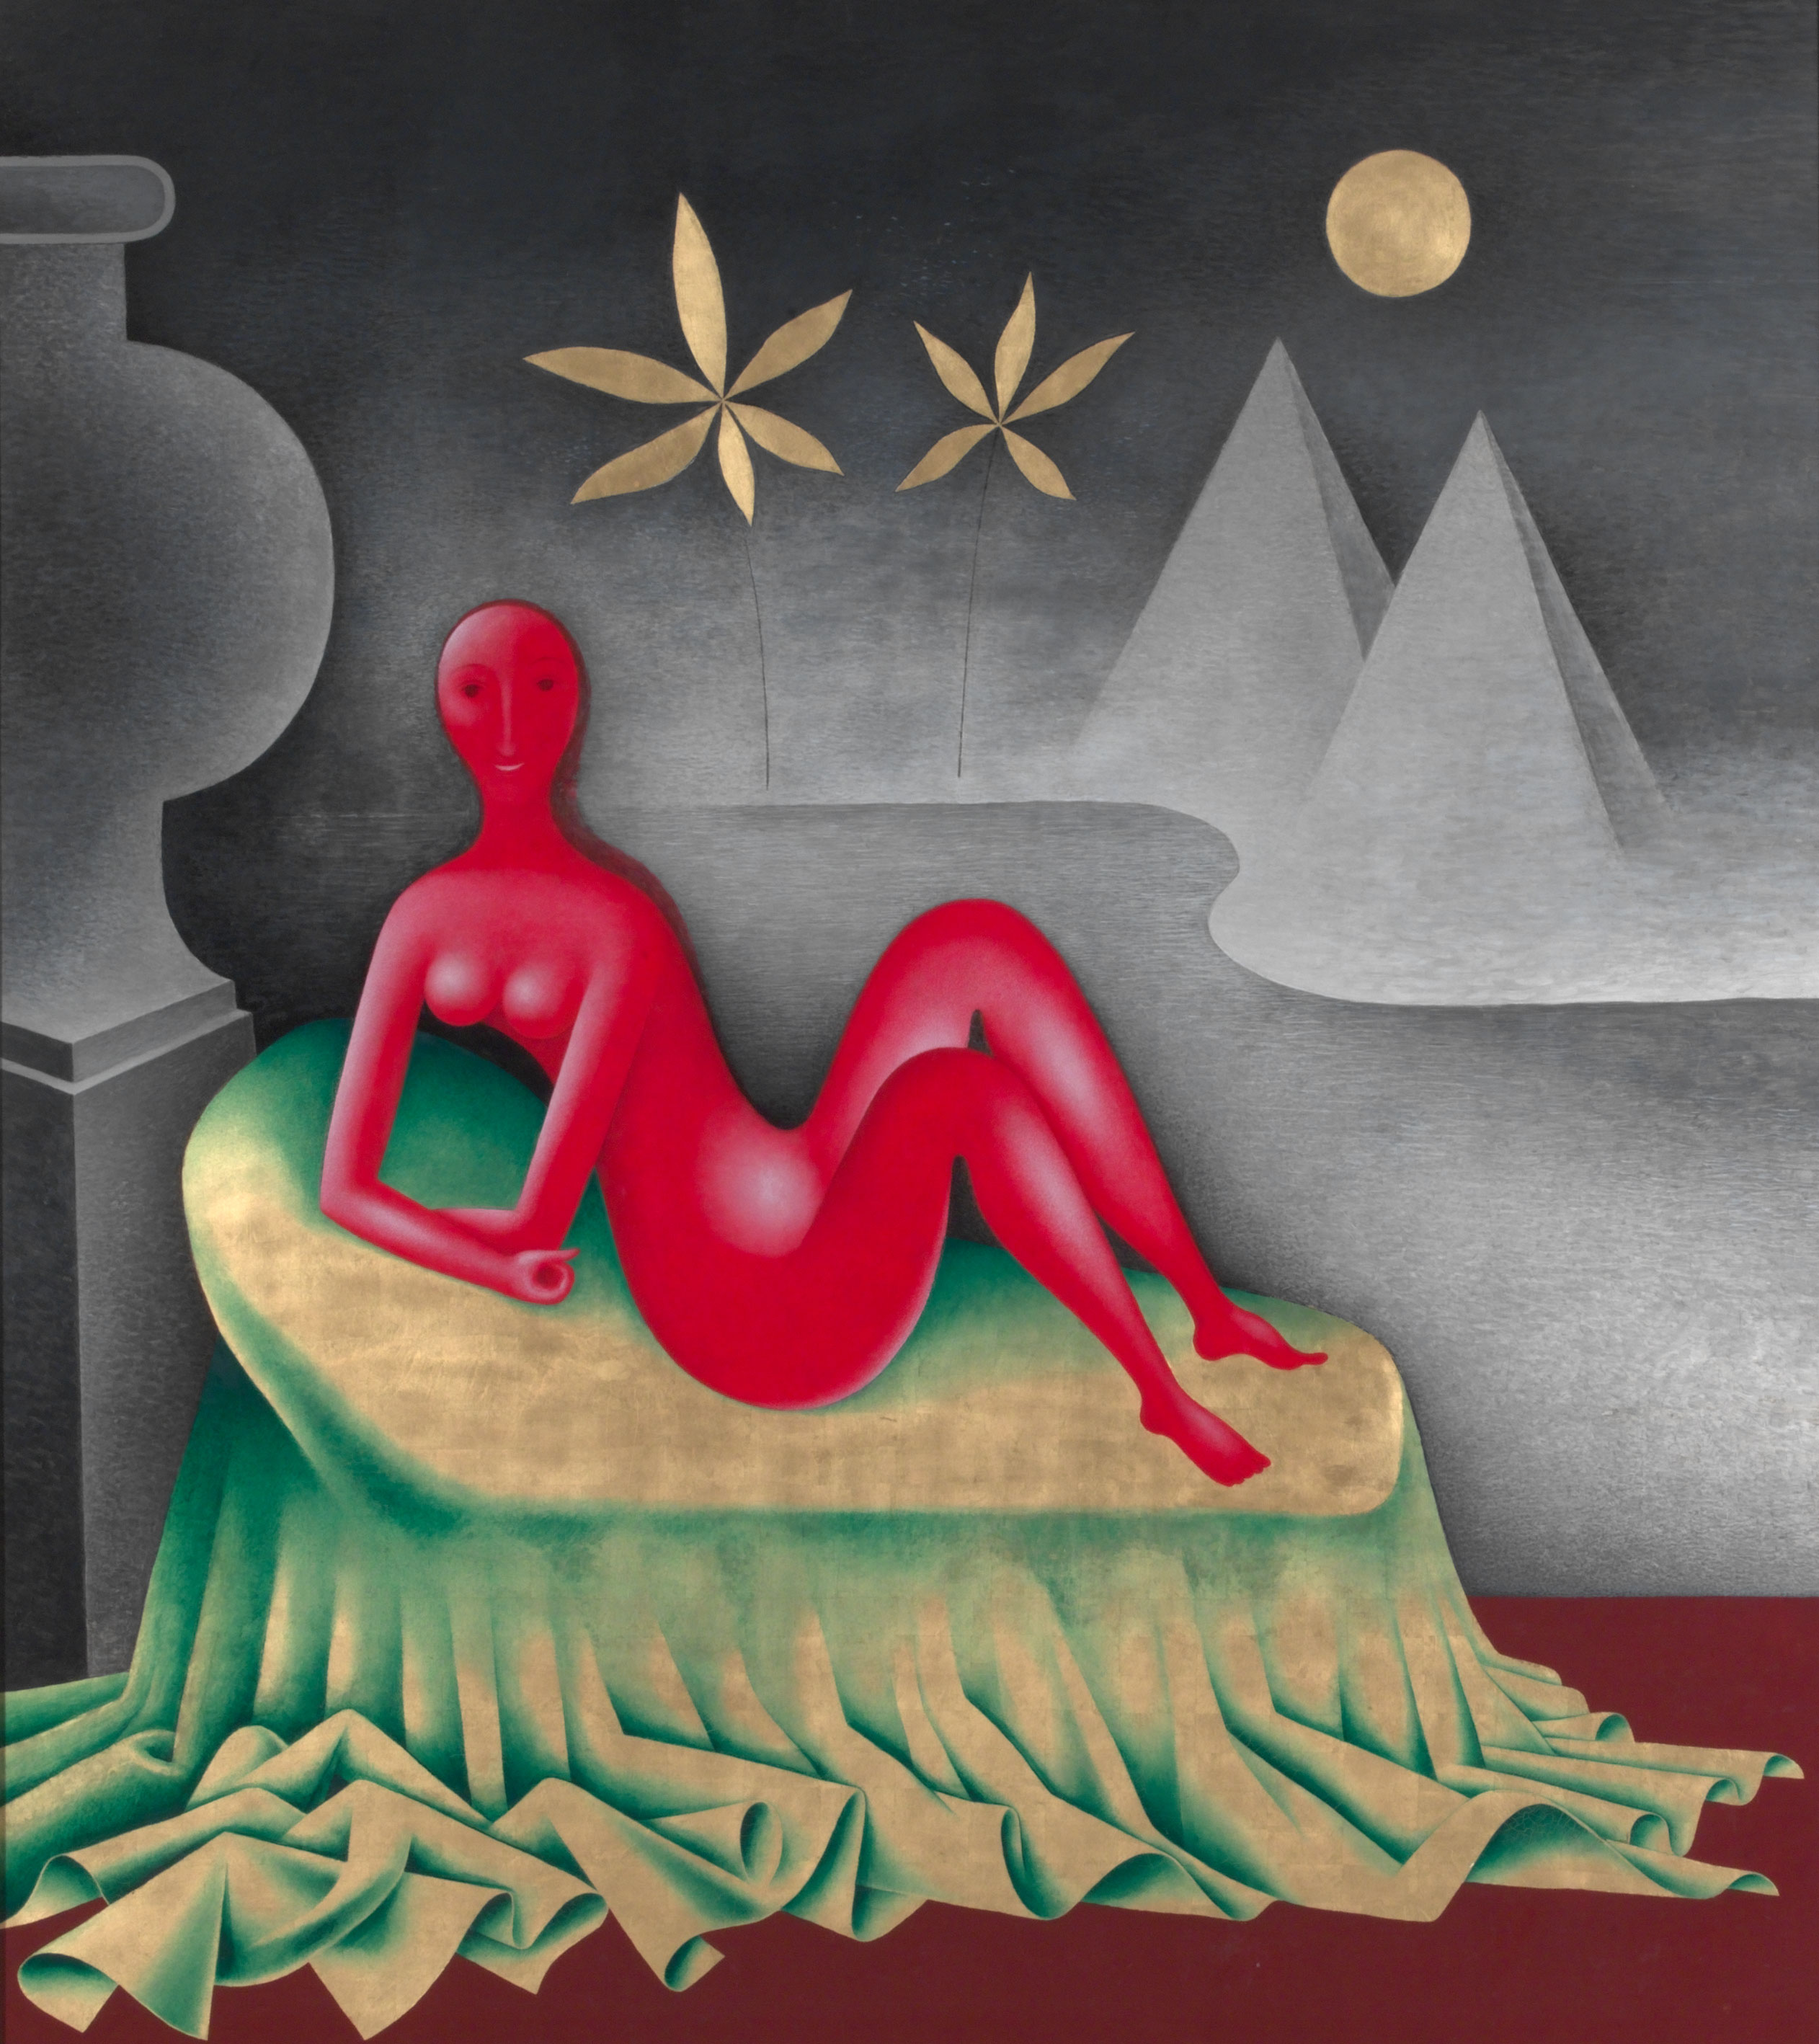 Abstract painting of a woman lounging on a fabric-draped chaise longue, a vase to the viewer's left and pyramids and palm trees in the background